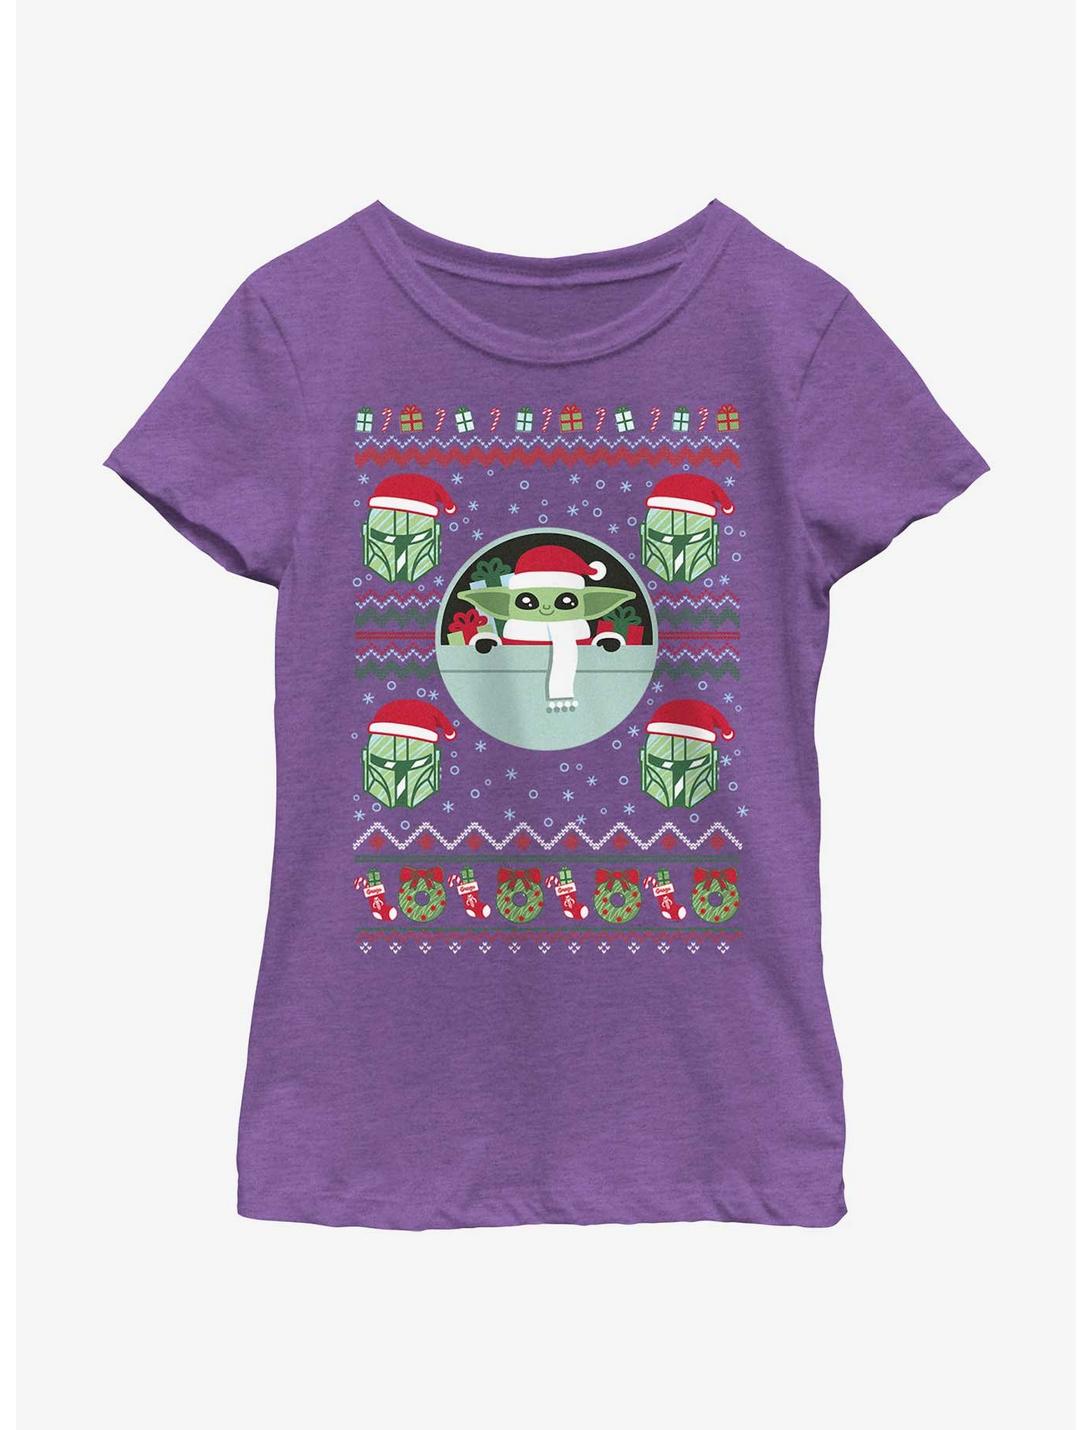 Star Wars The Mandalorian The Child Ugly Christmas Pattern Youth Girls T-Shirt, PURPLE BERRY, hi-res